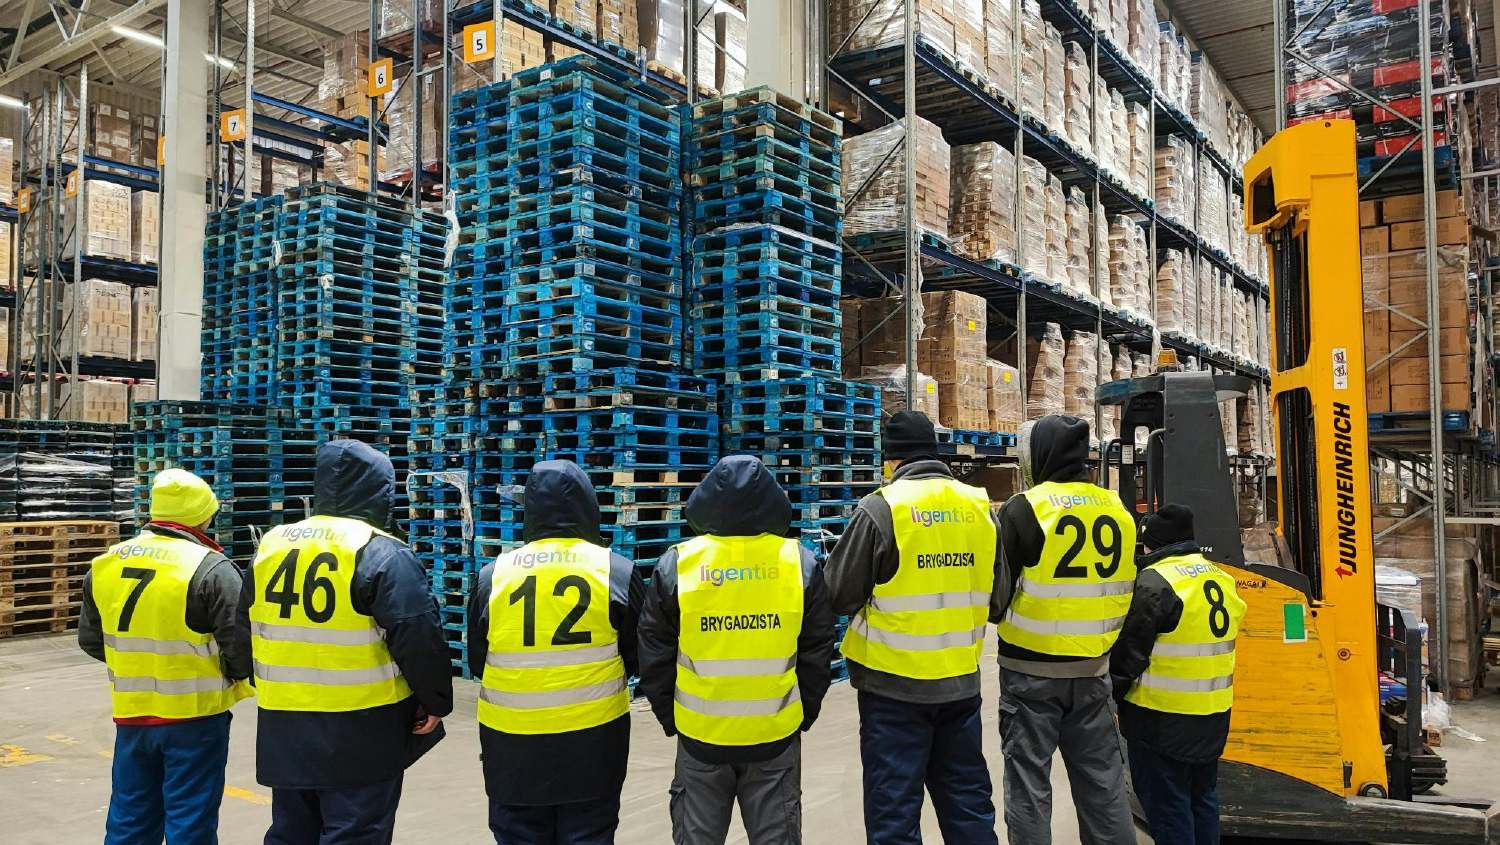 Warehouse workers in Poland 